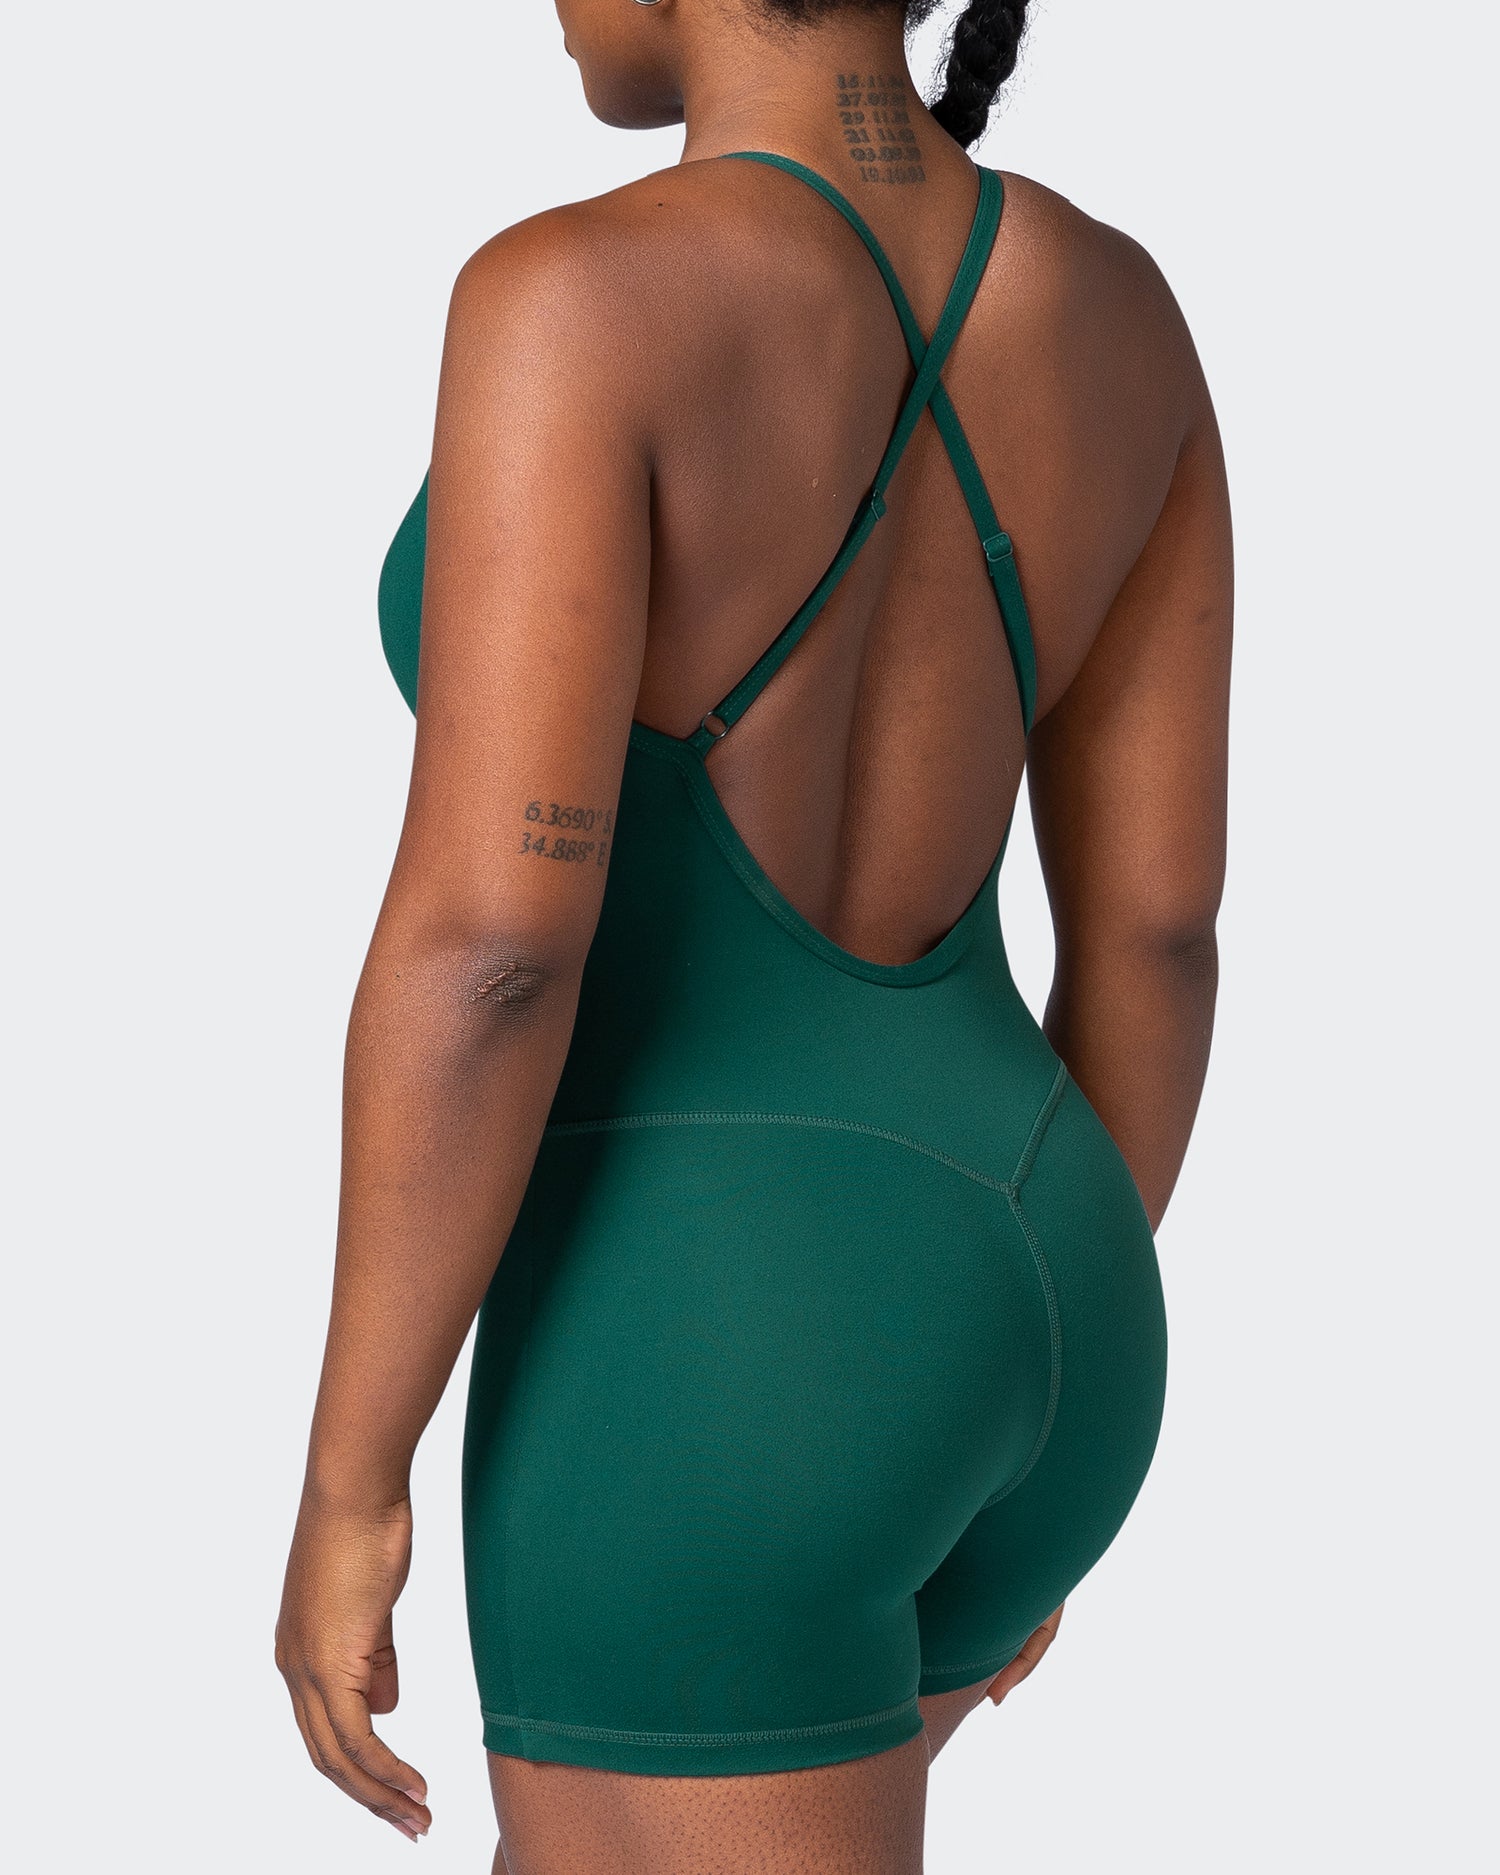 Game Changer One Piece - Evergreen